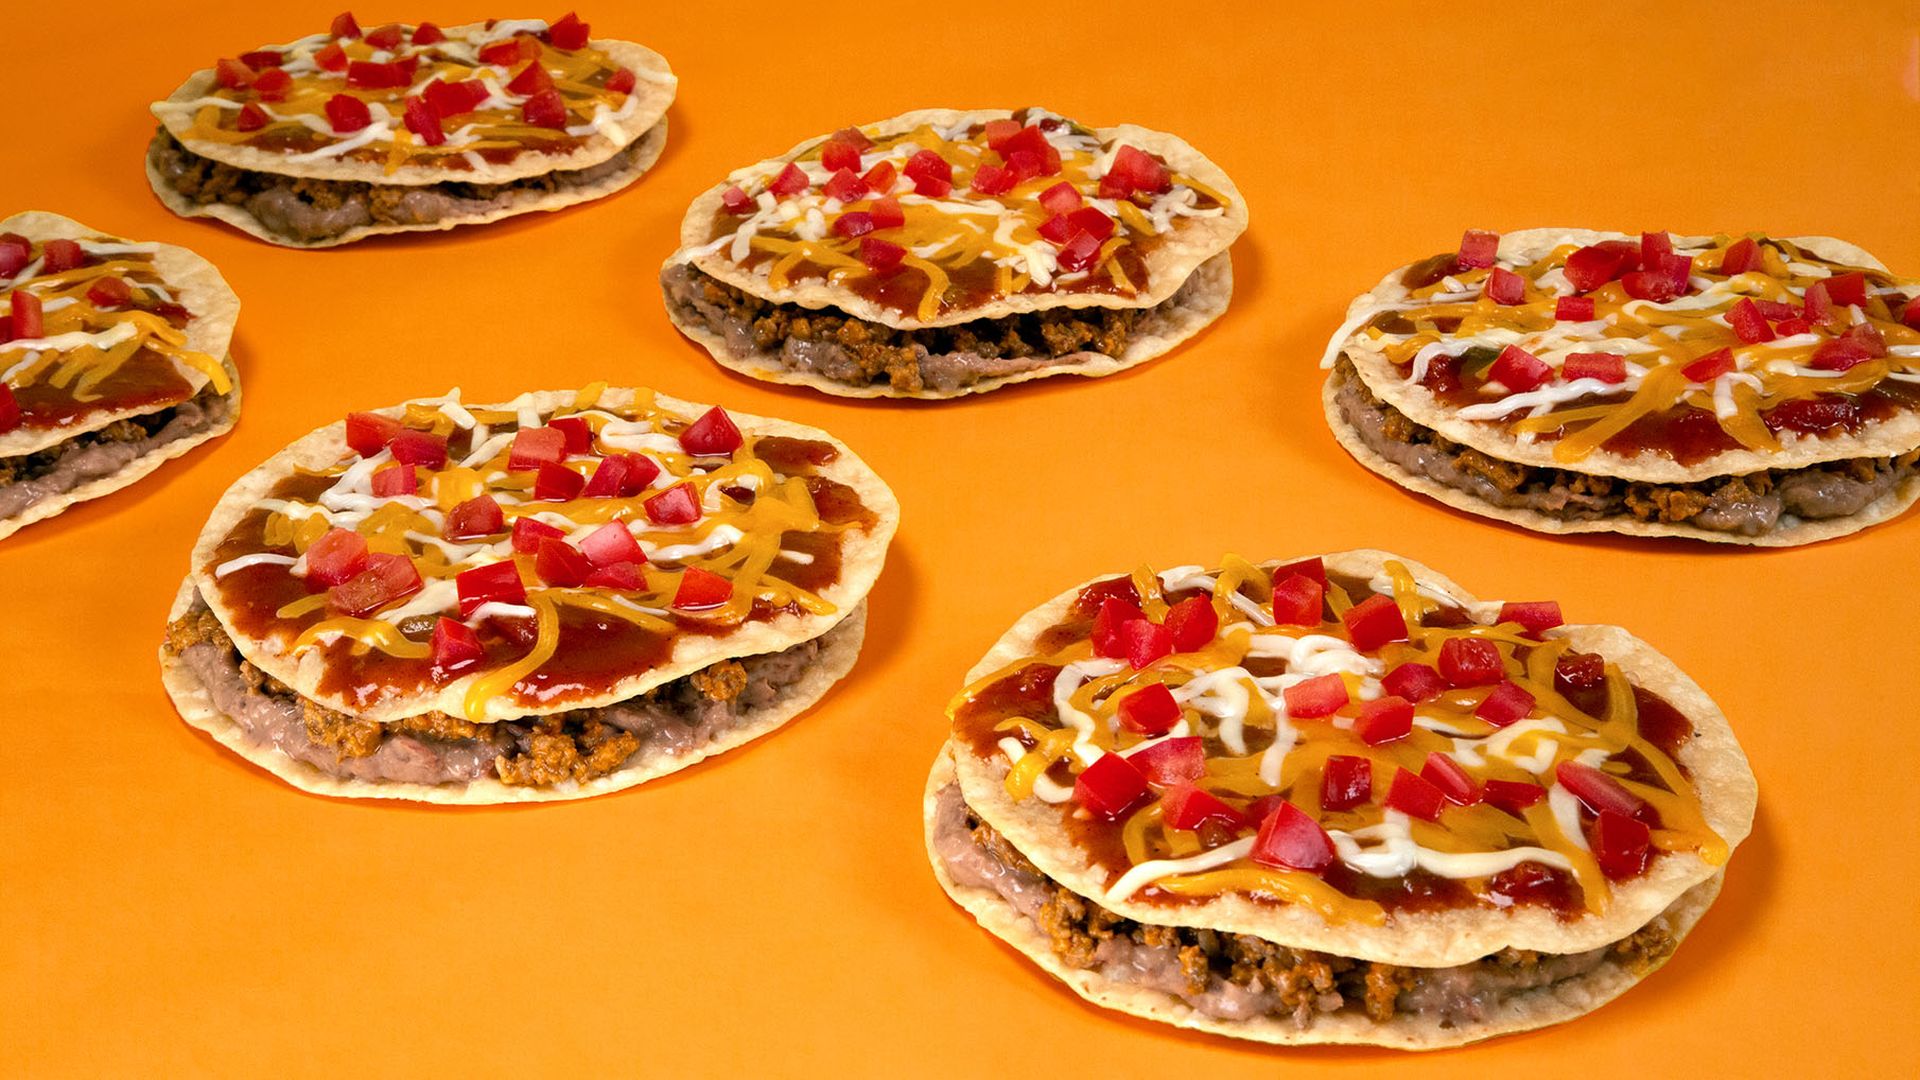 Taco Bell Mexican Pizzas on orange background